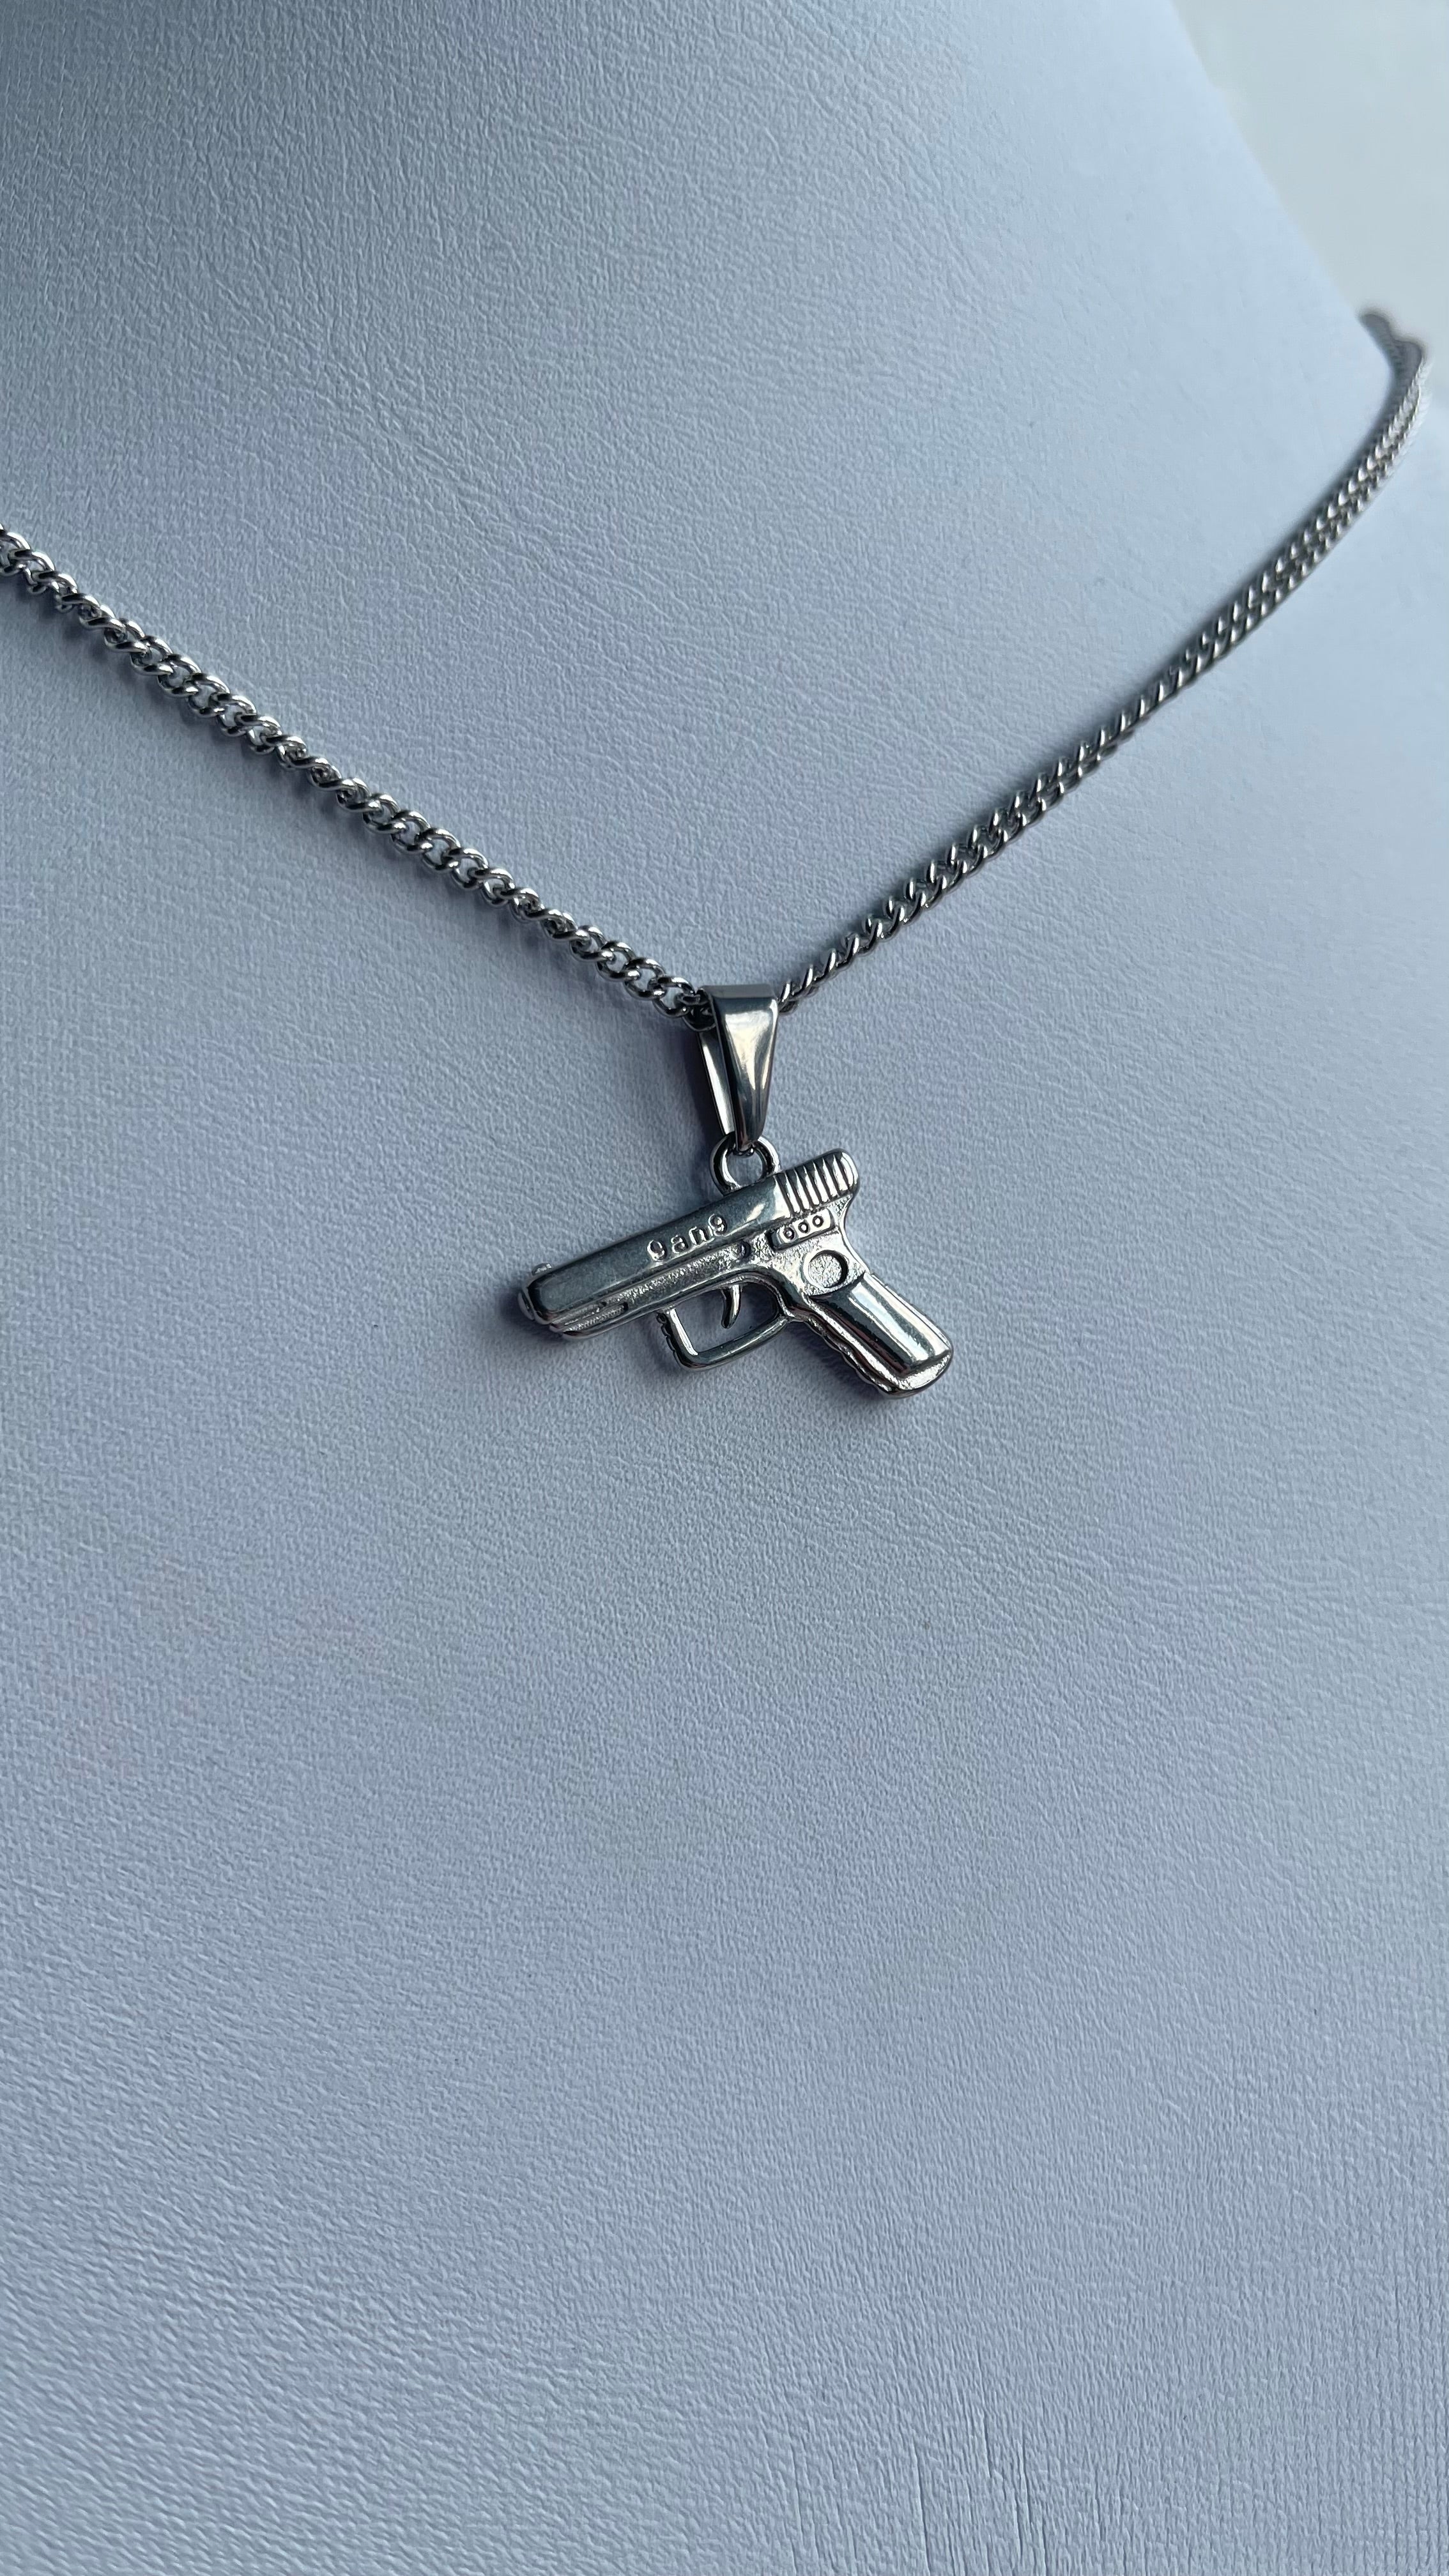 Pistol pendant on rounded box chain